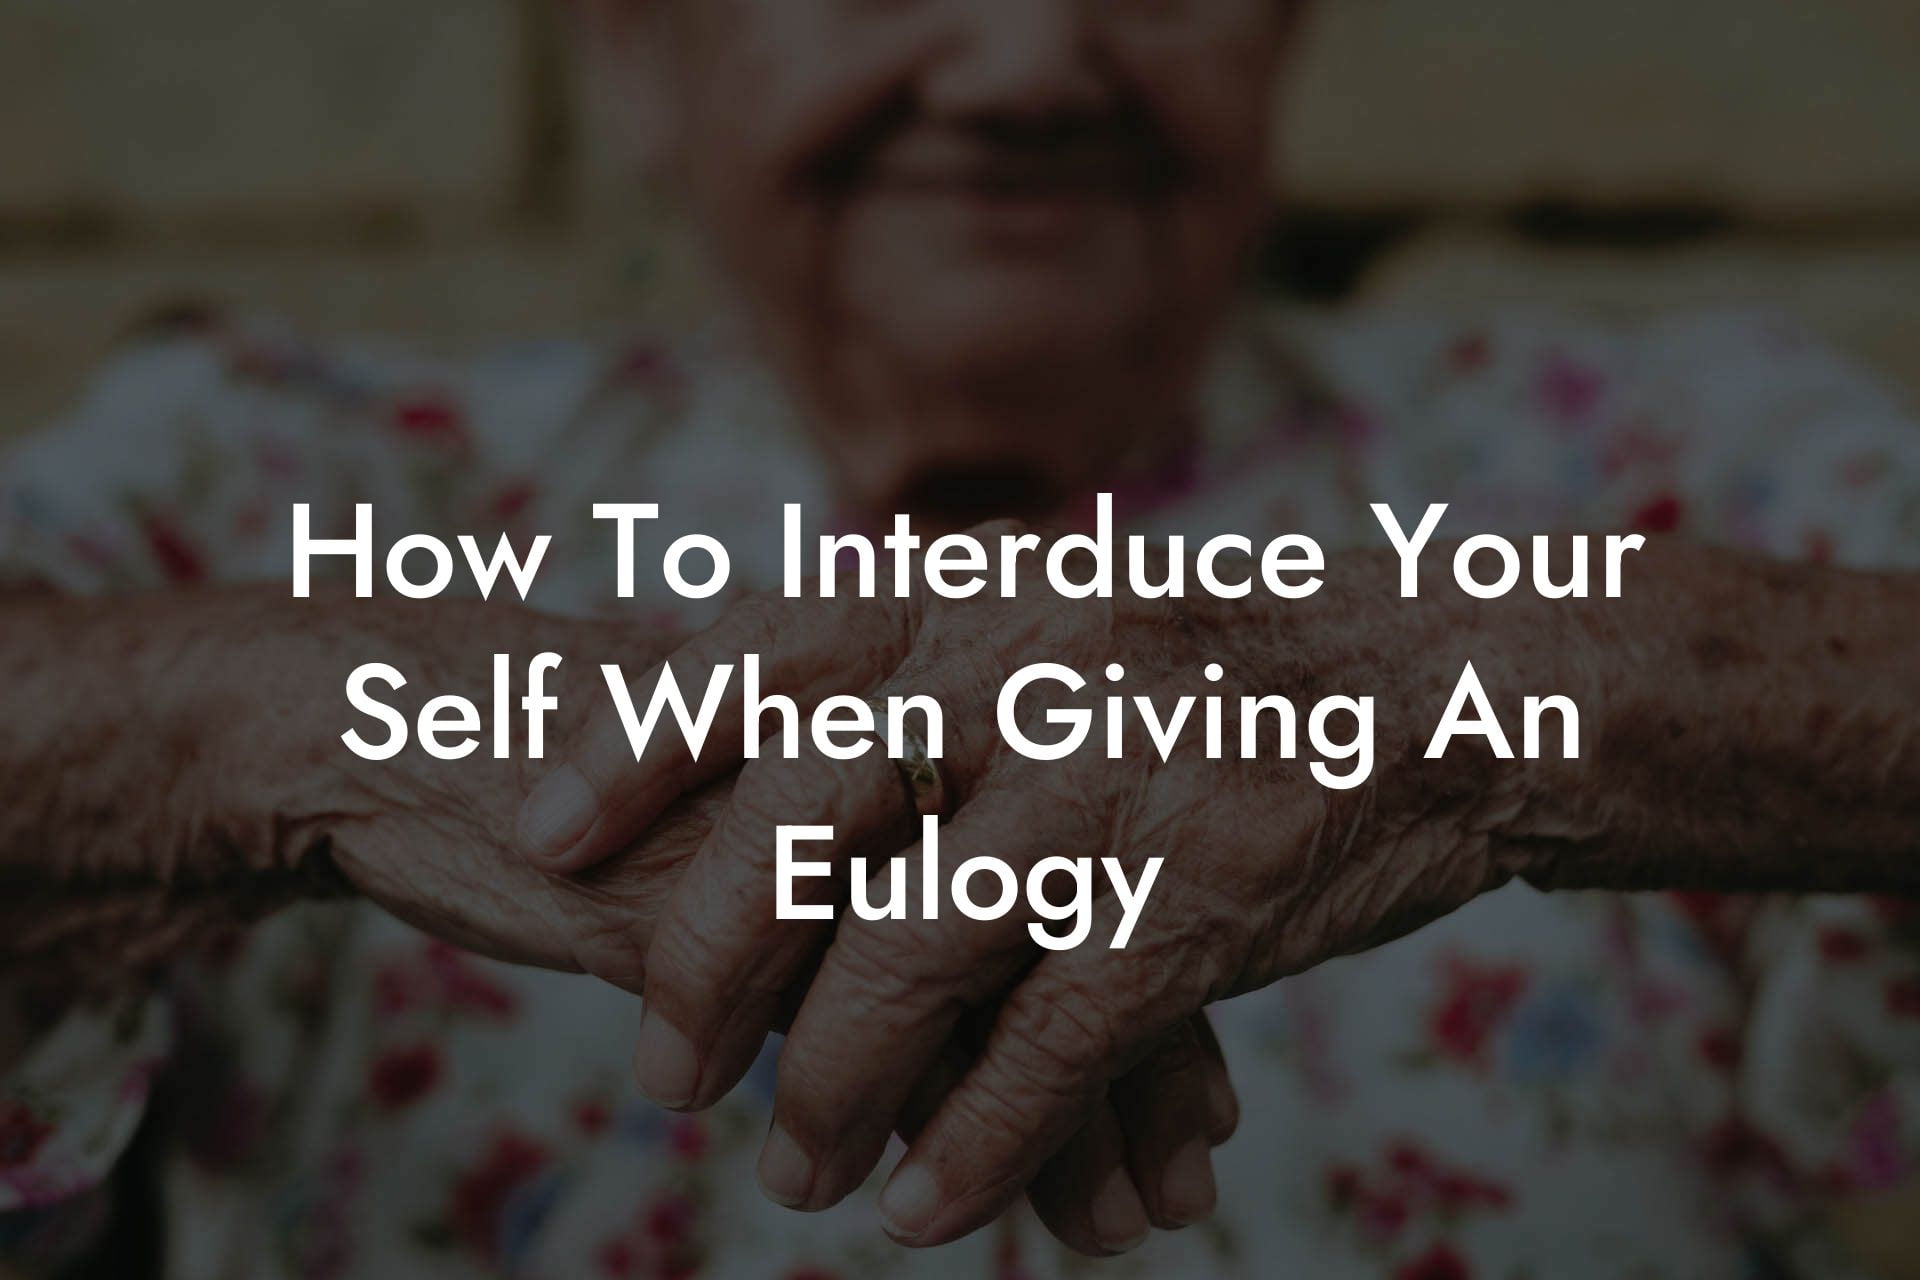 How To Interduce Your Self When Giving An Eulogy